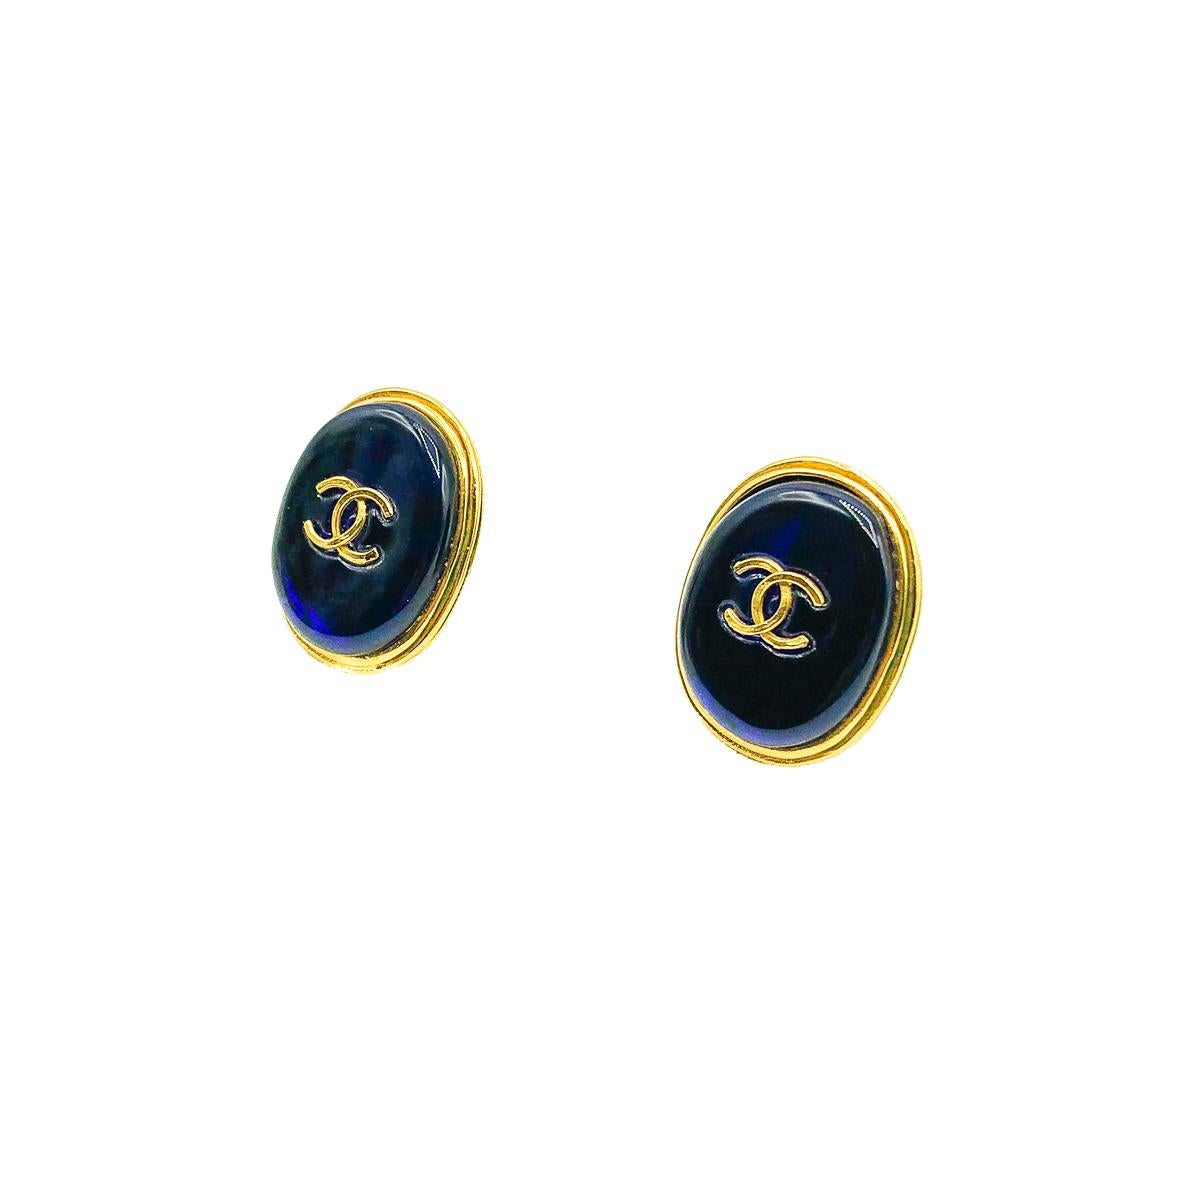 A beautiful pair of electric blue Vintage Chanel Gripoix Earrings dating to the 1993 Autumn Winter collection. Created for the House of Chanel by Maison Gripoix, Paris. Crafted in gold plated metal with electric blue pate de verre (poured glass).